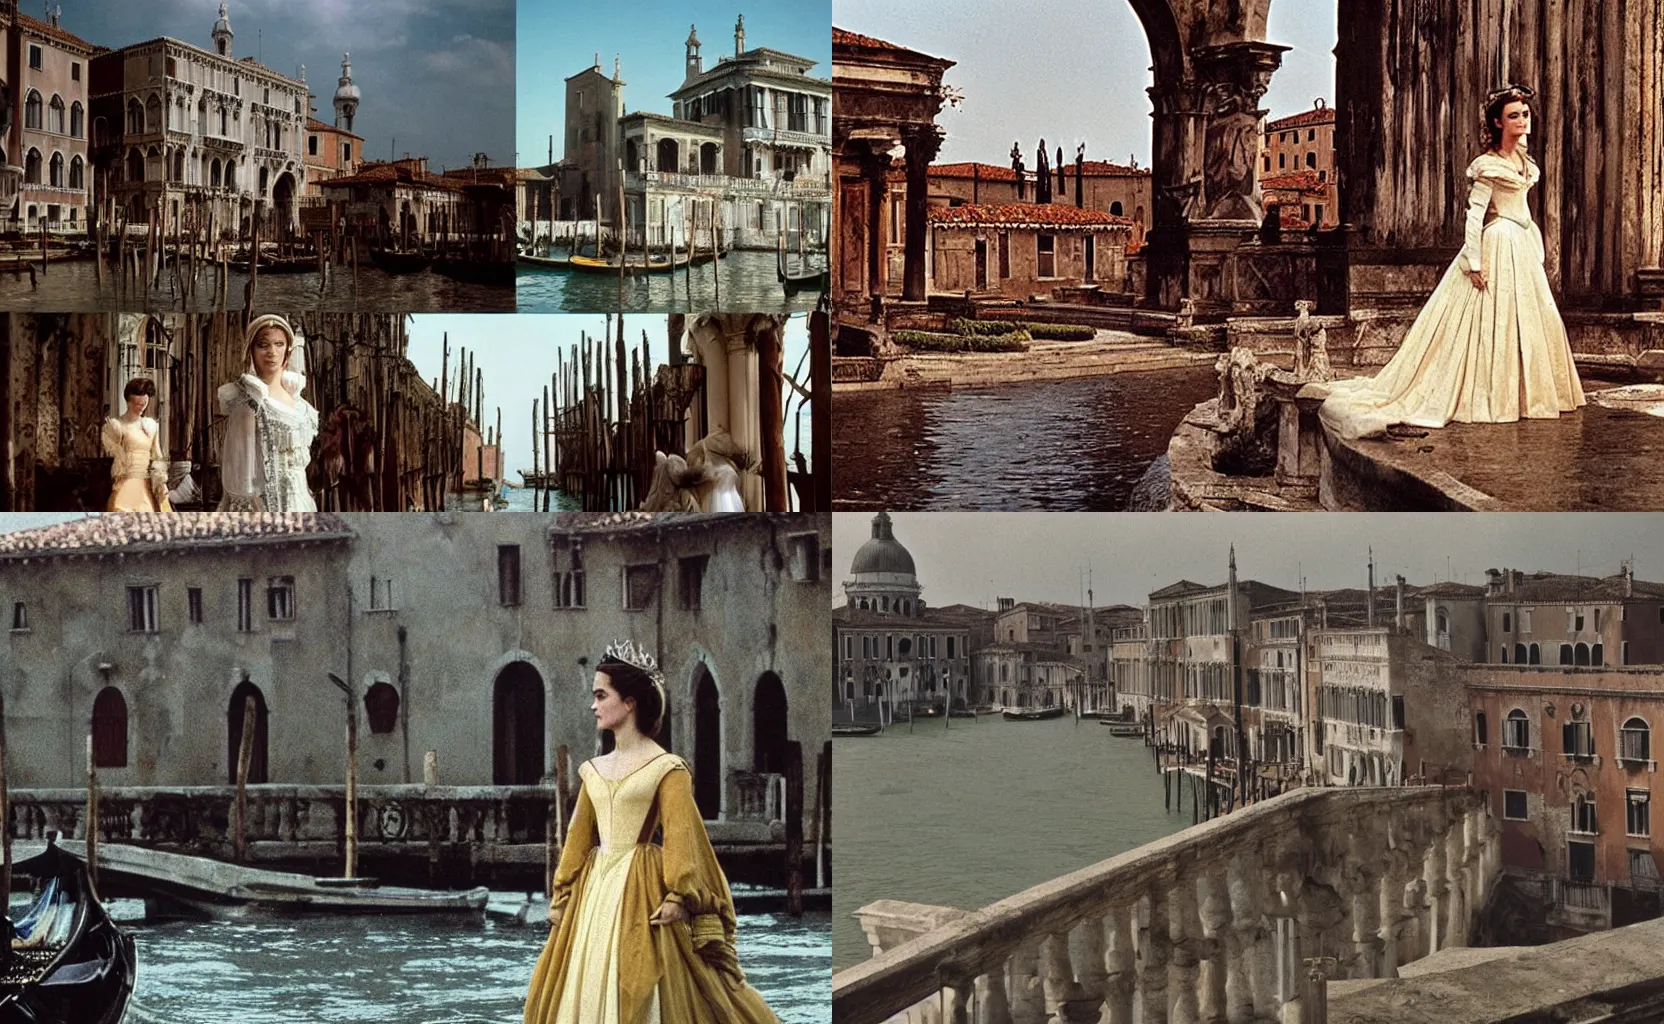 Prompt: scene of pulciana ( 1 9 7 6 ) a film of luchino visconti with a close up emma watson as a duchess. venice and a labyrinth in the background. technicolor, flamboyant in the style of piranesi